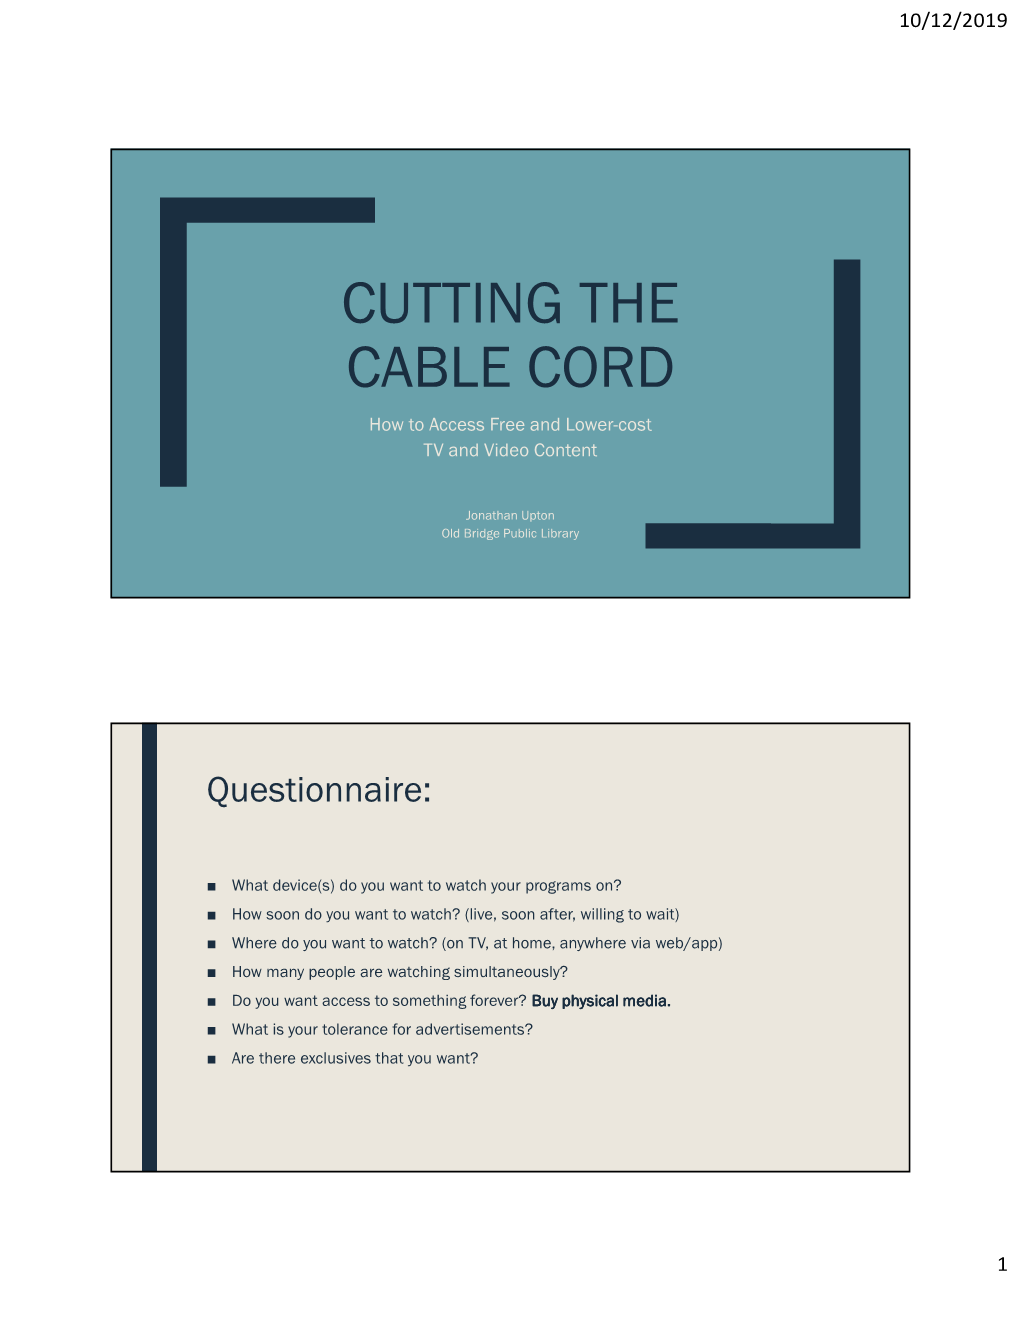 CUTTING the CABLE CORD How to Access Free and Lower-Cost TV and Video Content